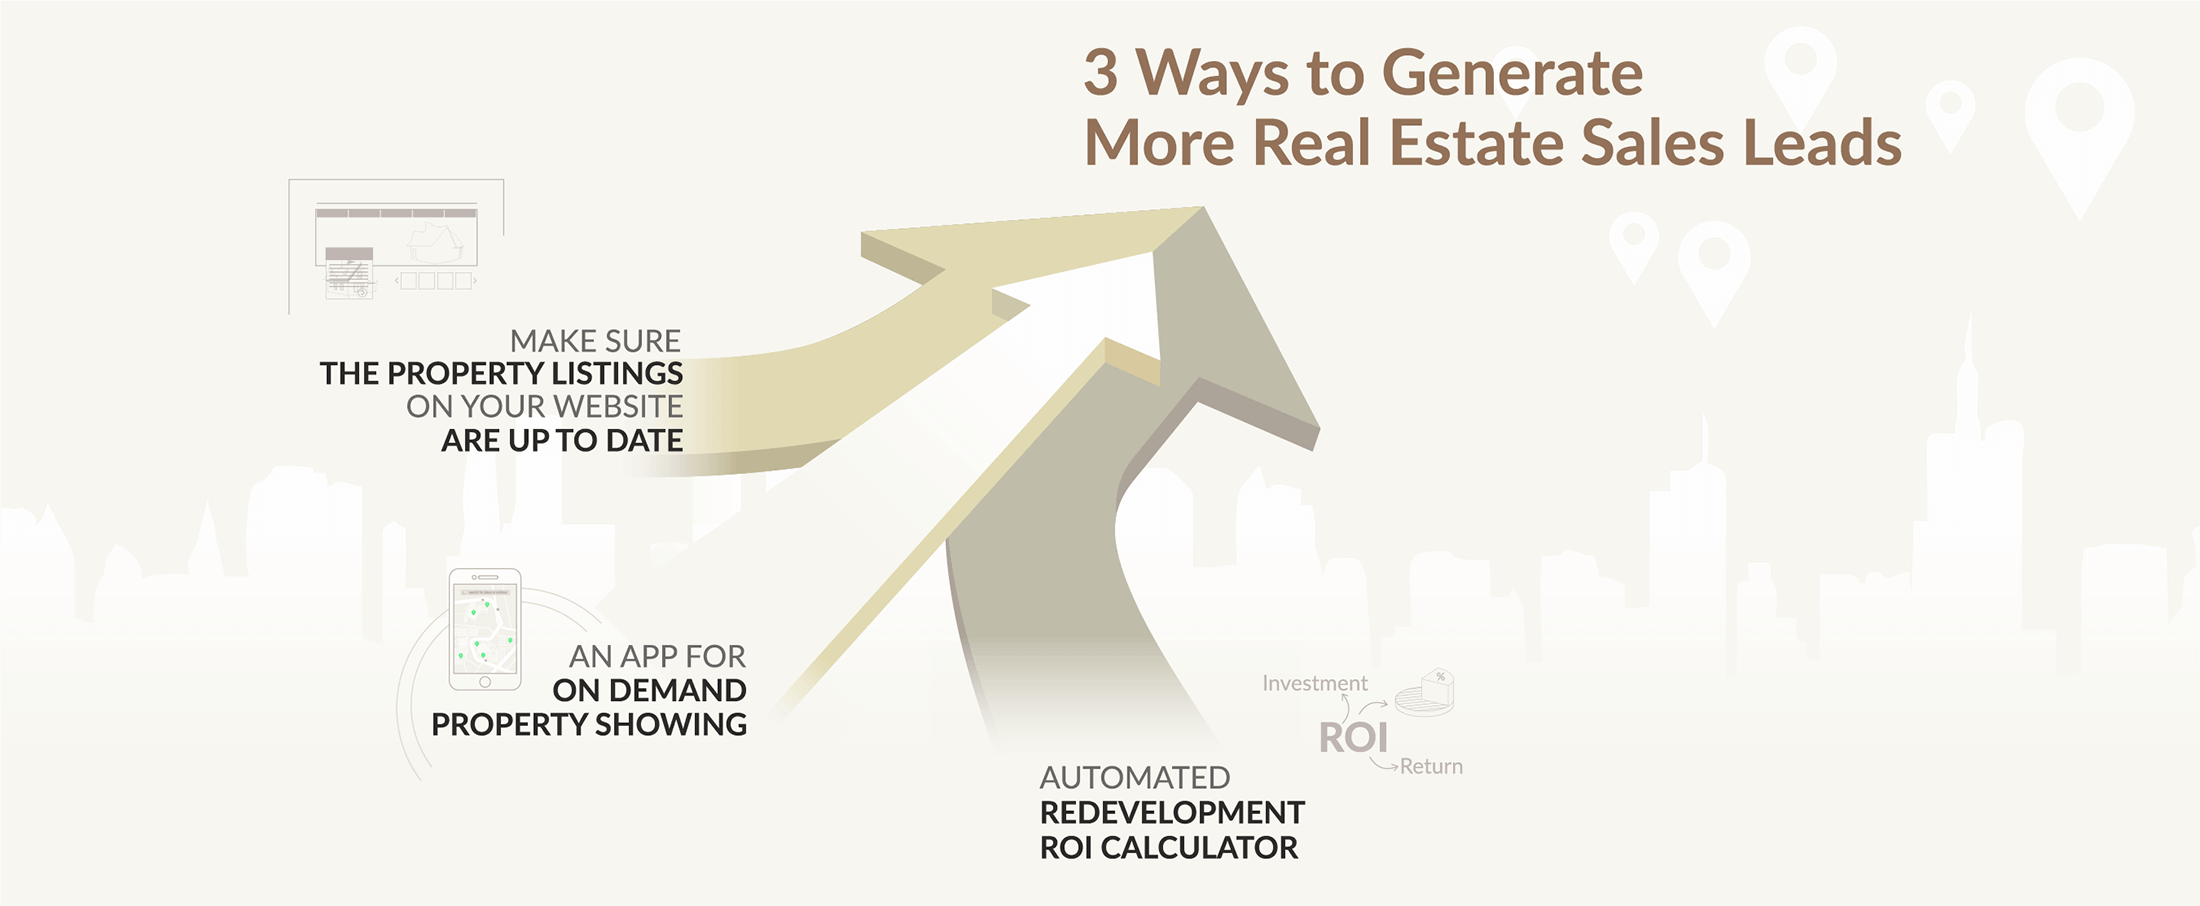 3 Ways to Generate More Real Estate Sales Leads